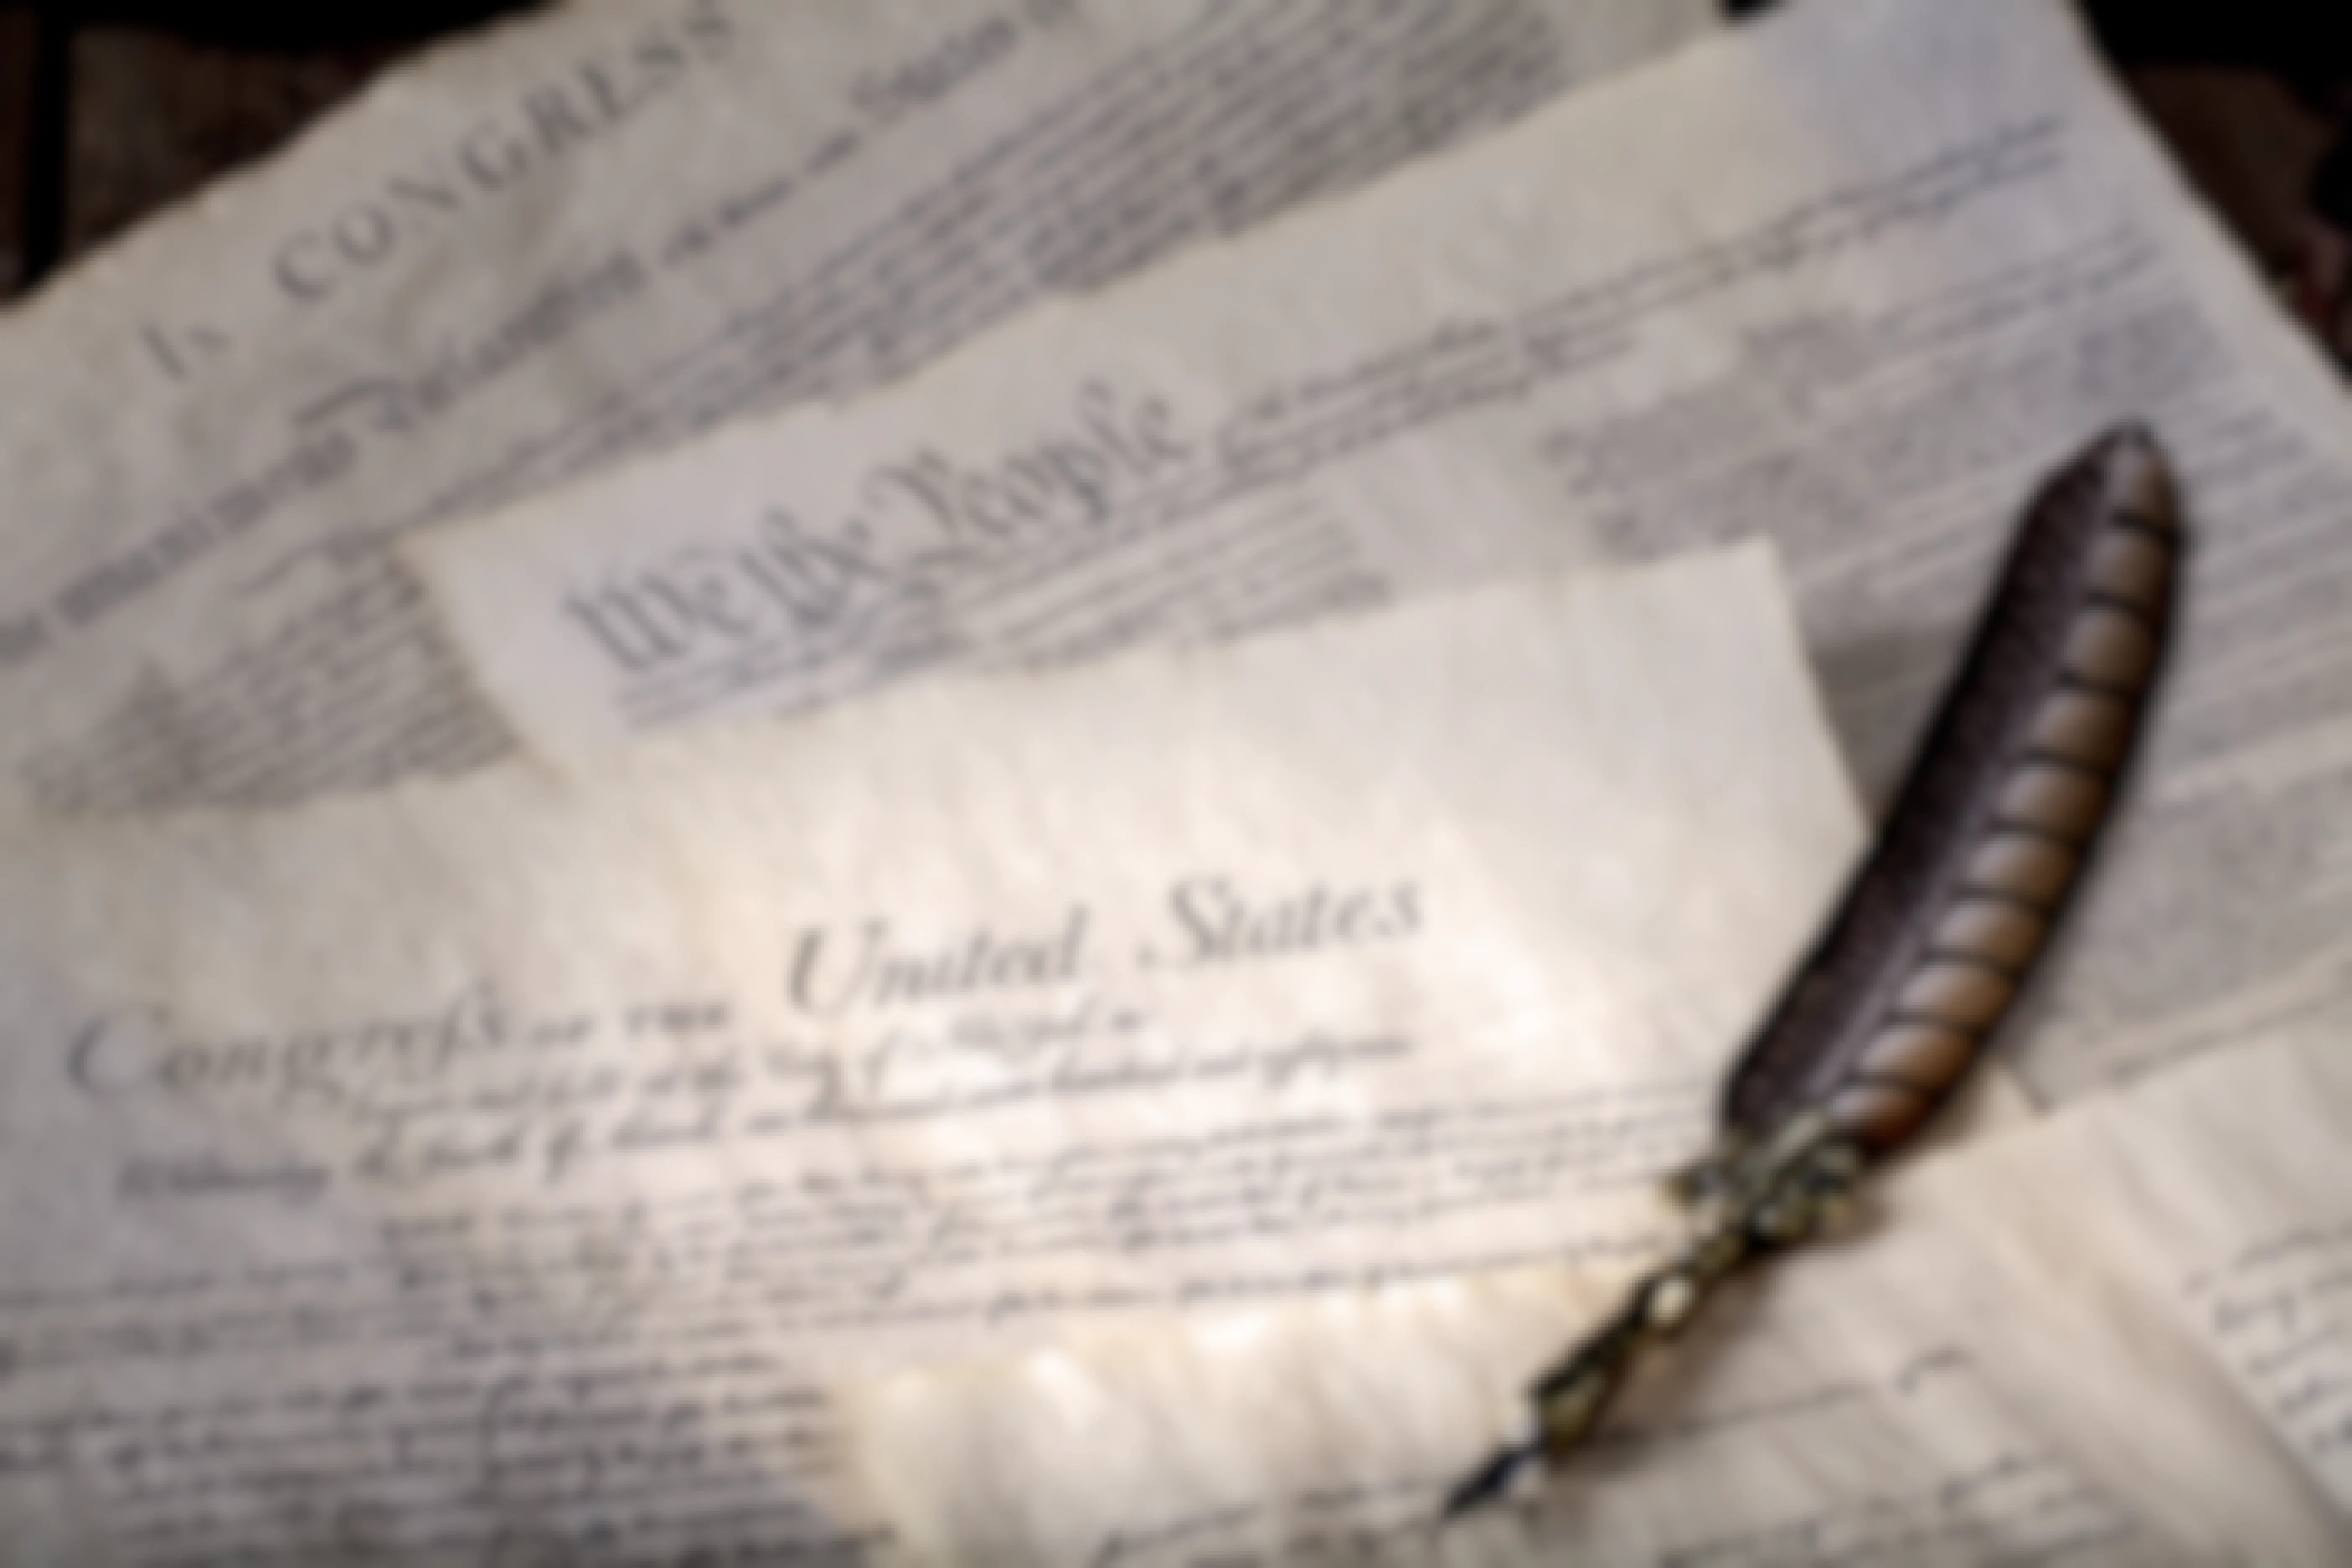 Historical documents for the United States government on a table with a quill pen.